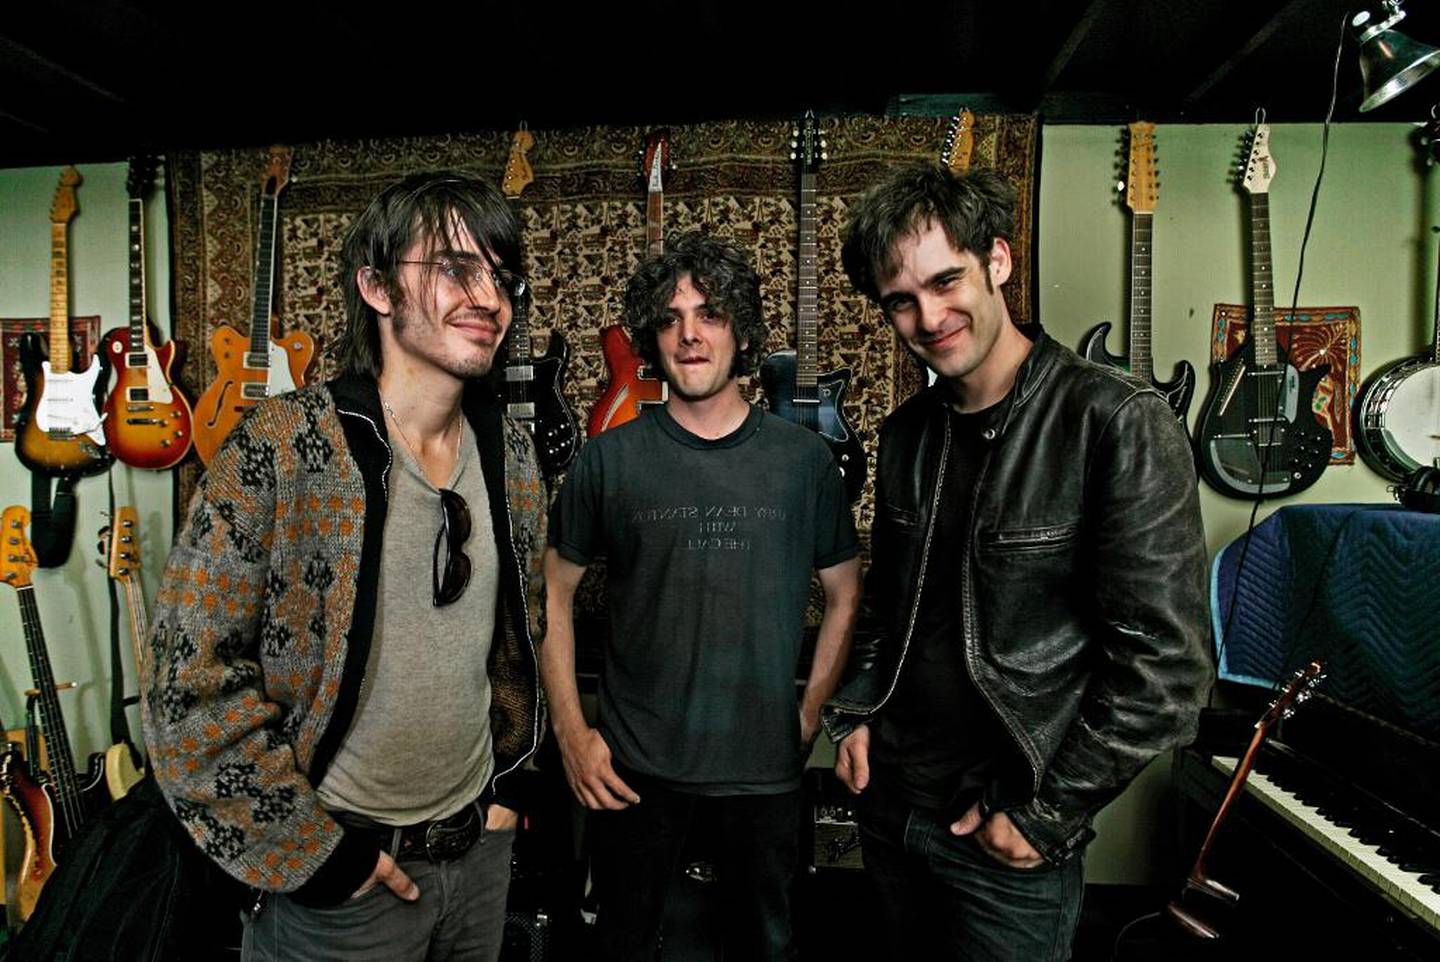 The band is comprised of Peter Hayes (guitar, bass, vocals) middle; Robert Levon Been (guitar, bass, vocals) right, and Nick Jago (drums/percussion) left.